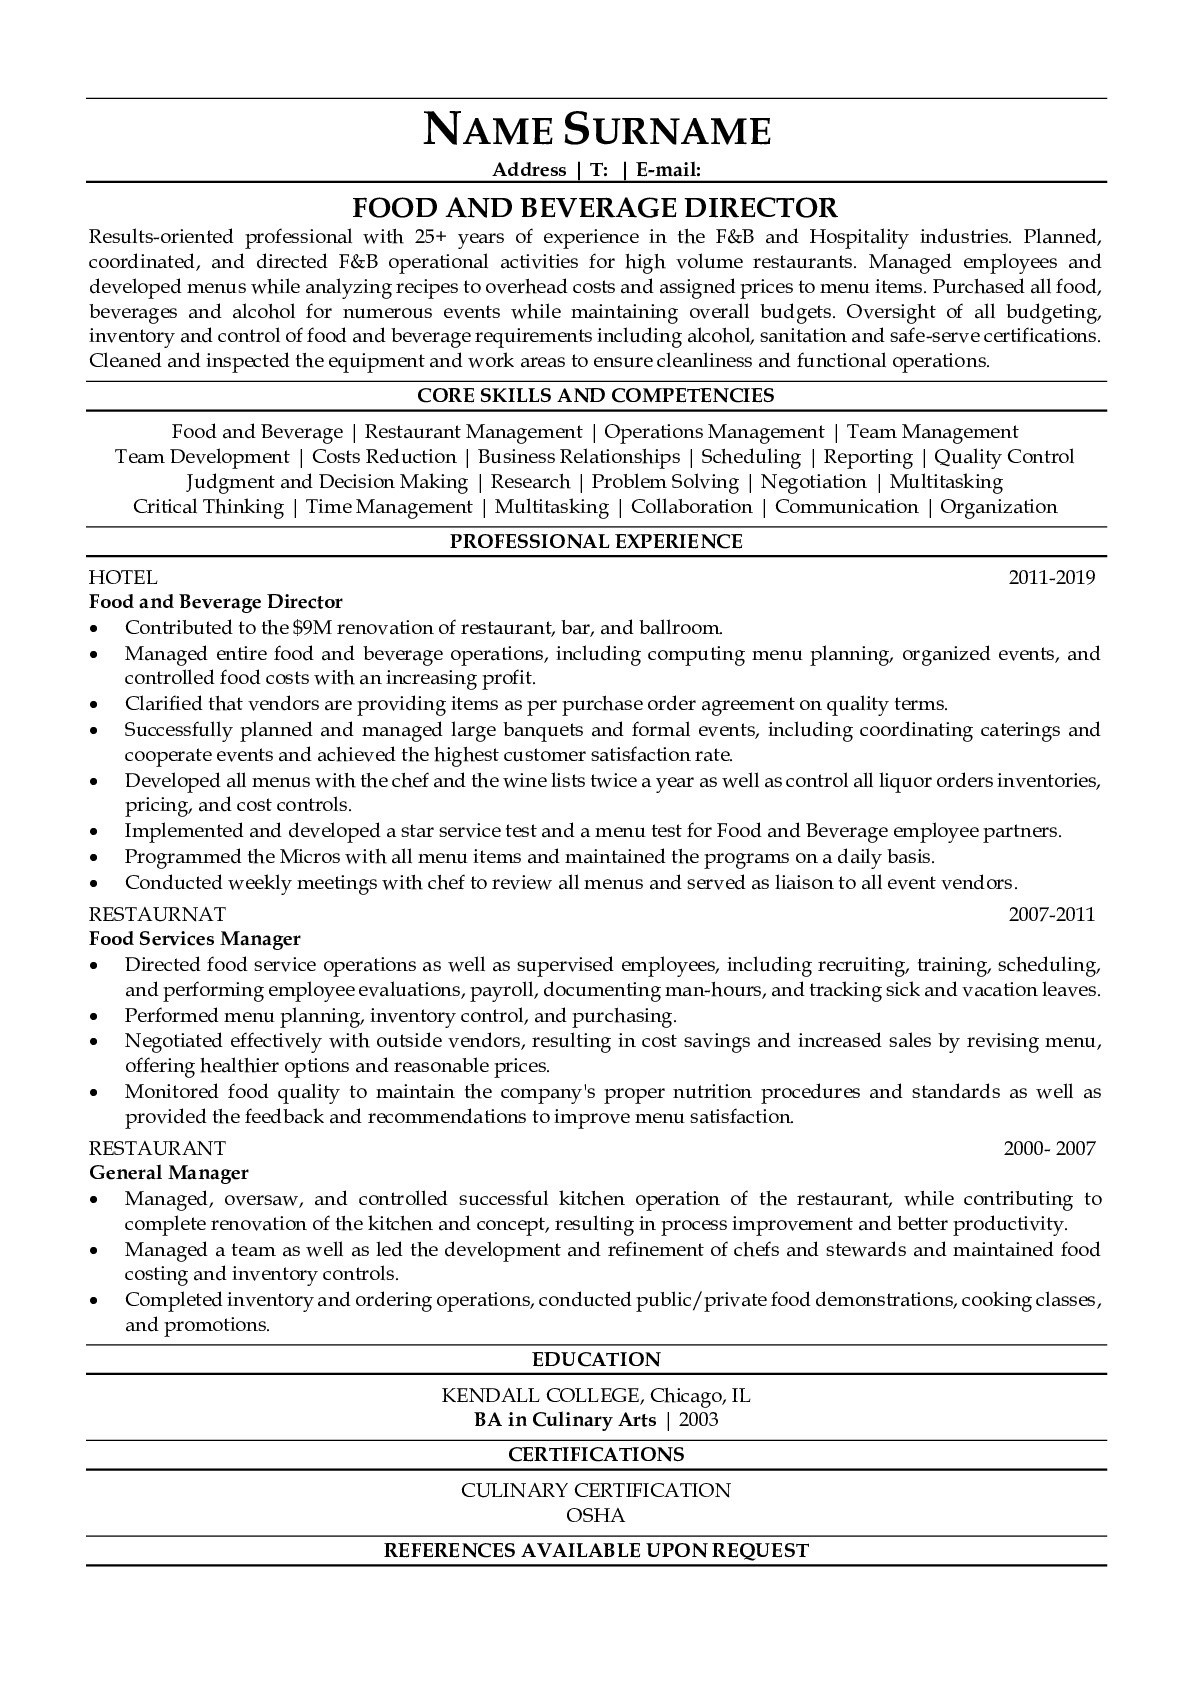 Resume Sample for A Directore Of Operations Culinary Job Food and Beverage Director Resume Sample Resumegets.com